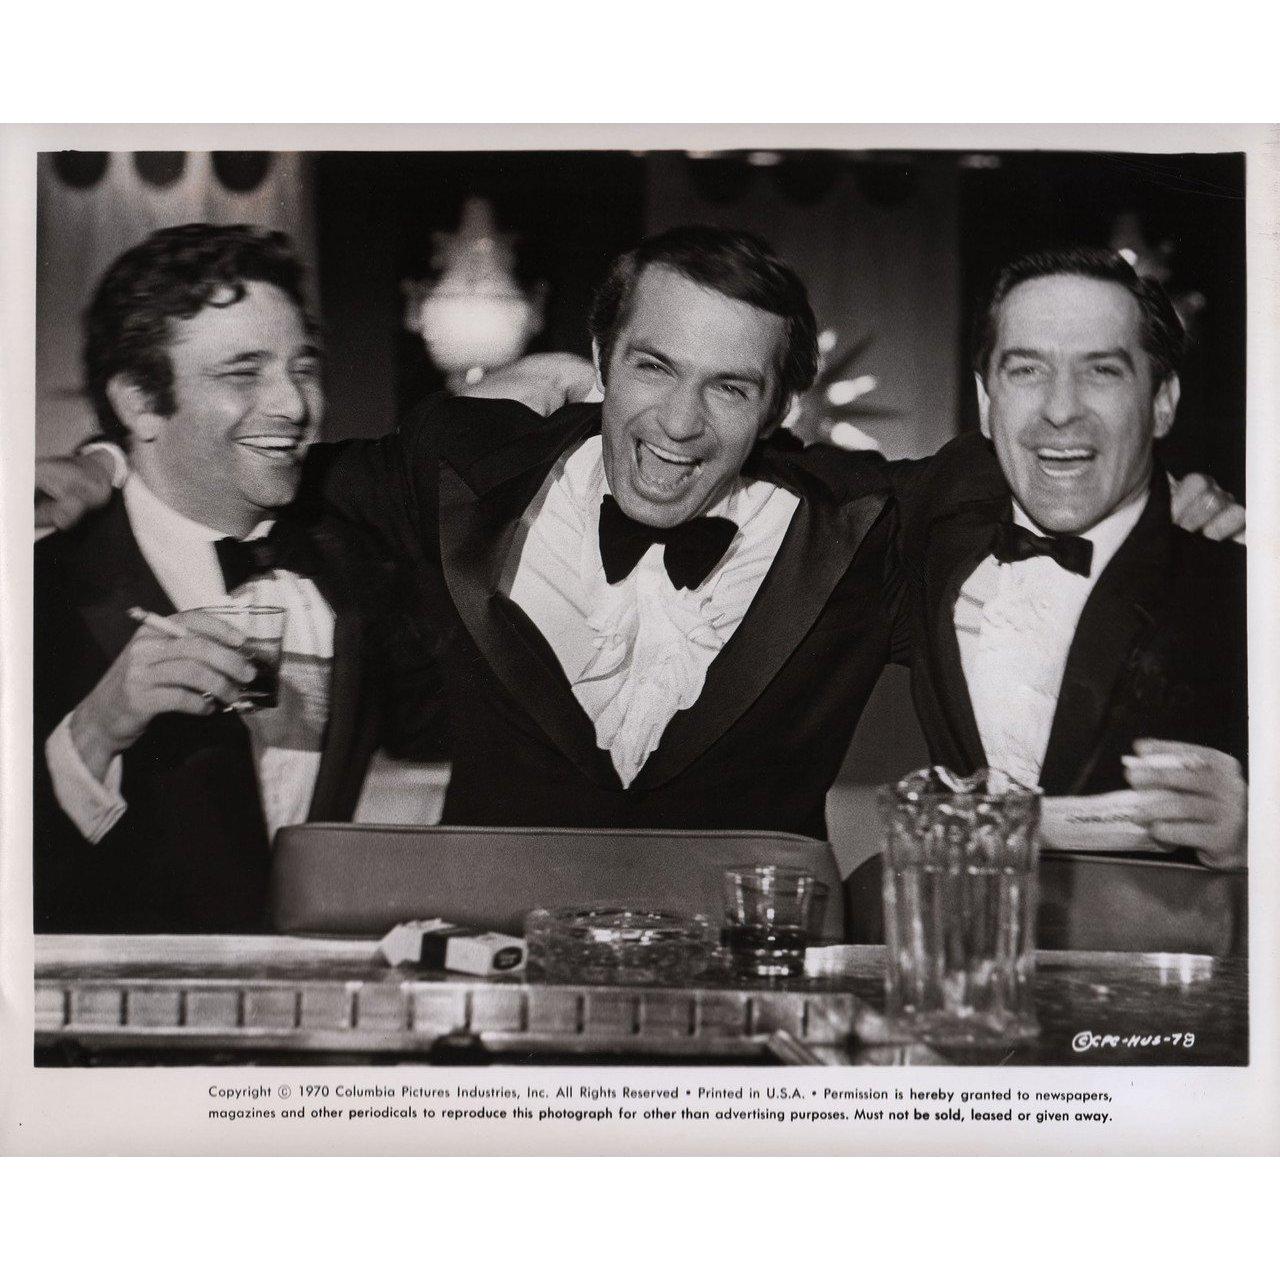 Original 1970 U.S. silver gelatin single-weight photo for the film Husbands directed by John Cassavetes with Ben Gazzara / Peter Falk / John Cassavetes / Jenny Runacre. Fine condition. Please note: the size is stated in inches and the actual size